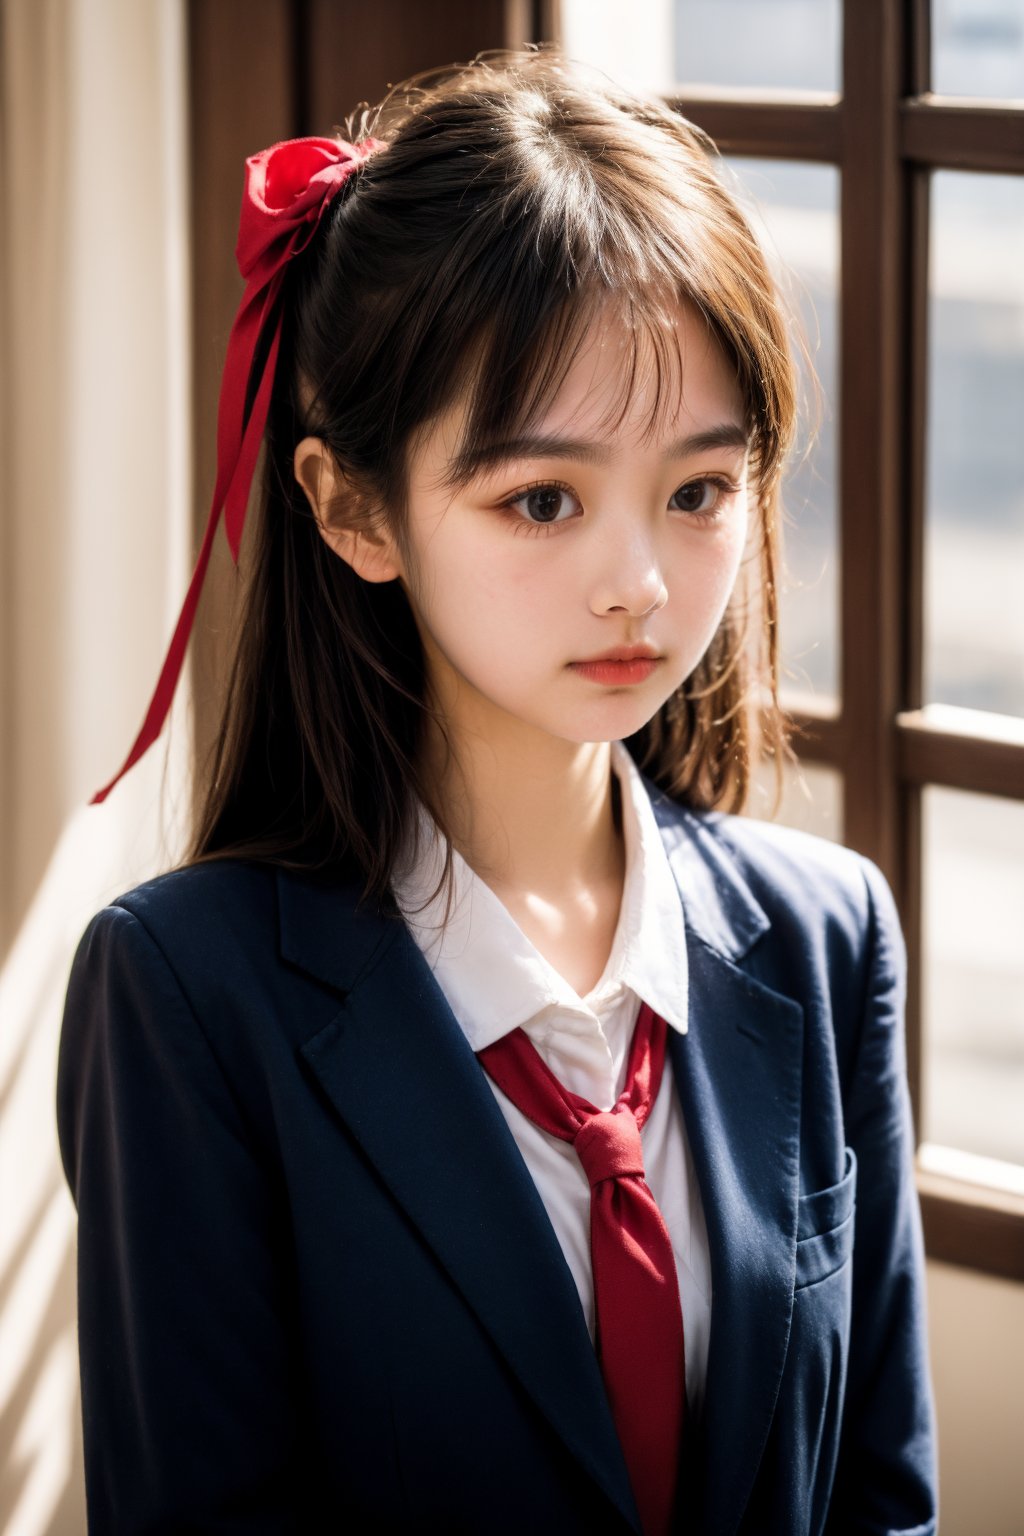 A pensive schoolgirl with a bow in her hair and wearing a dark blazer over a white shirt with a red ribbon tie looks away thoughtfully. The soft daylight accentuates her youthful innocence.,eyes look down,